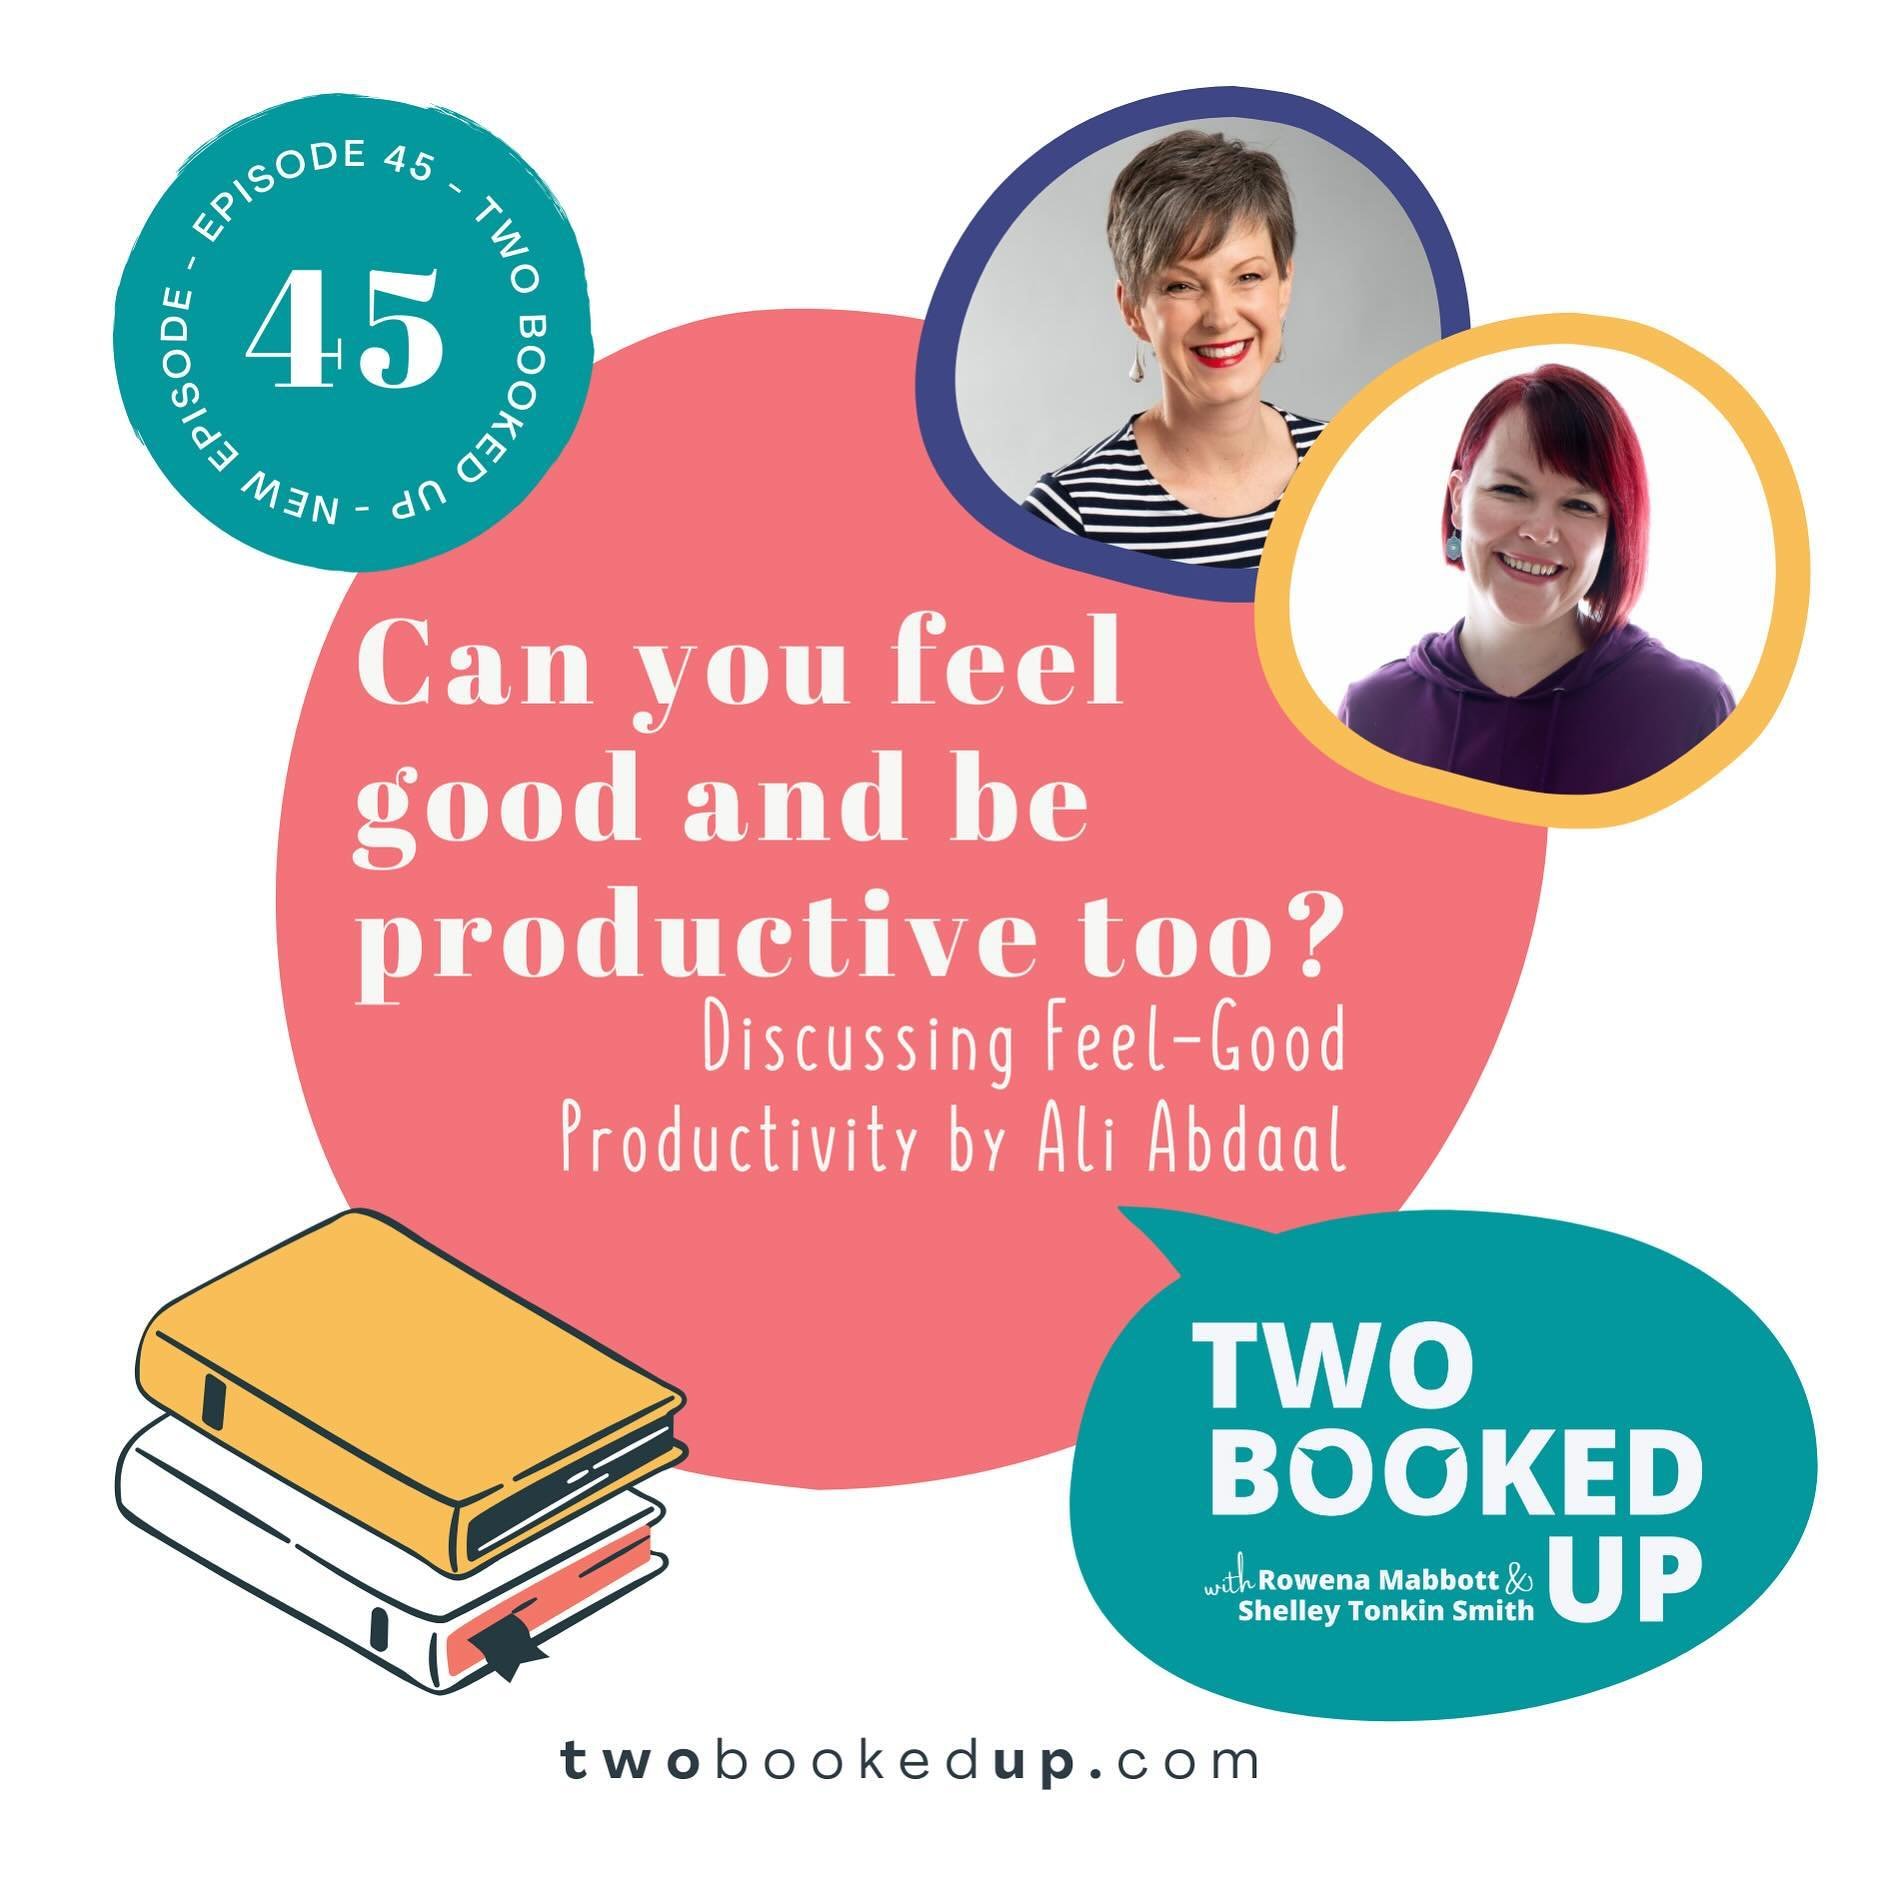 In this episode of Two Booked Up, Rowena and Shelley are discussing Ali Abdaal&rsquo;s book &ldquo;Feel Good Productivity&rdquo;.&nbsp;

Productivity books are often full of tips for working harder, hustling longer, and hacks to make the most of your